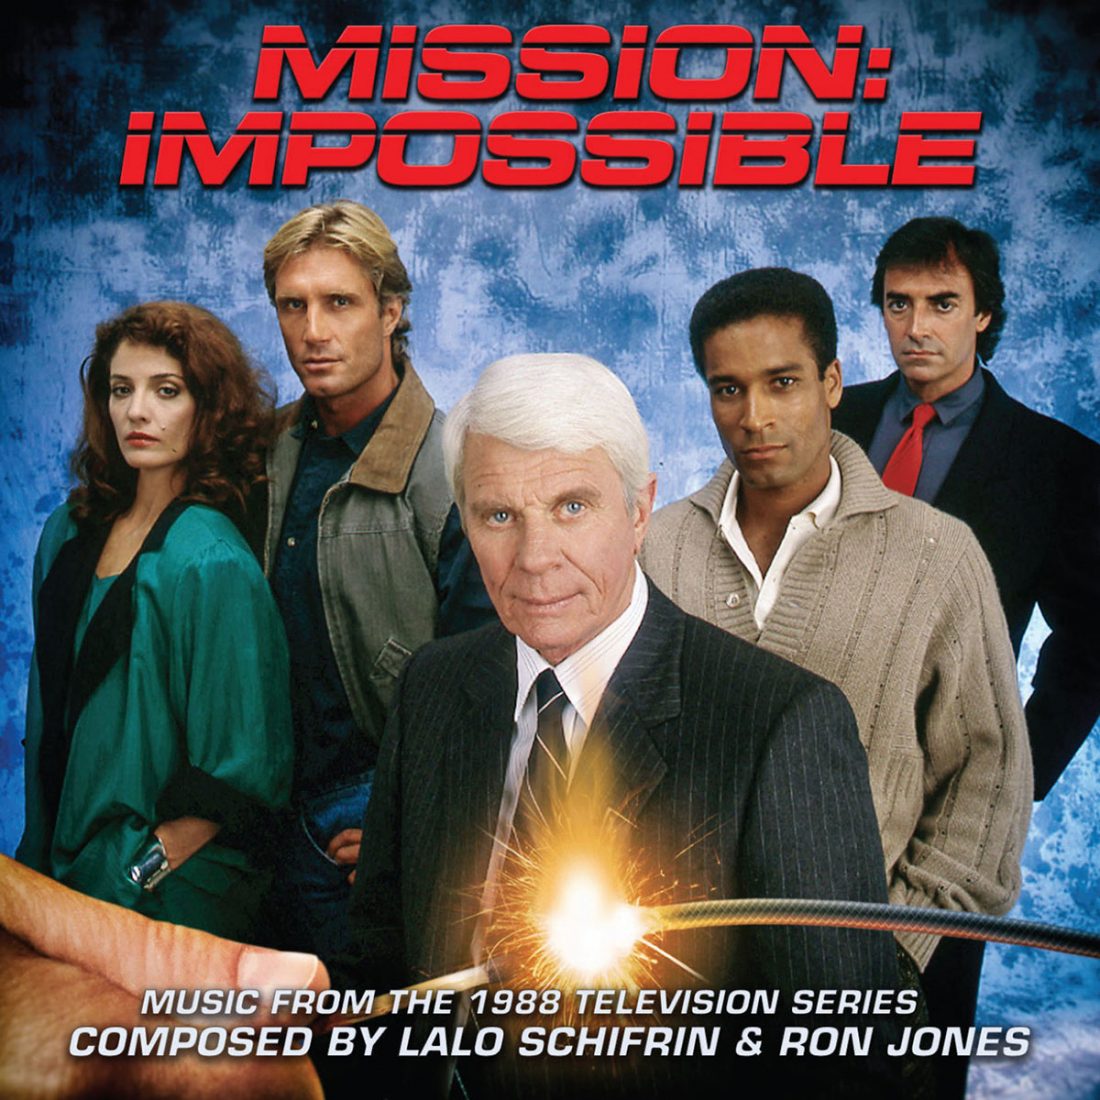 Mission: Impossible The 1988 Television Series Limited Edition Soundtrack Recordings 2-CD Set